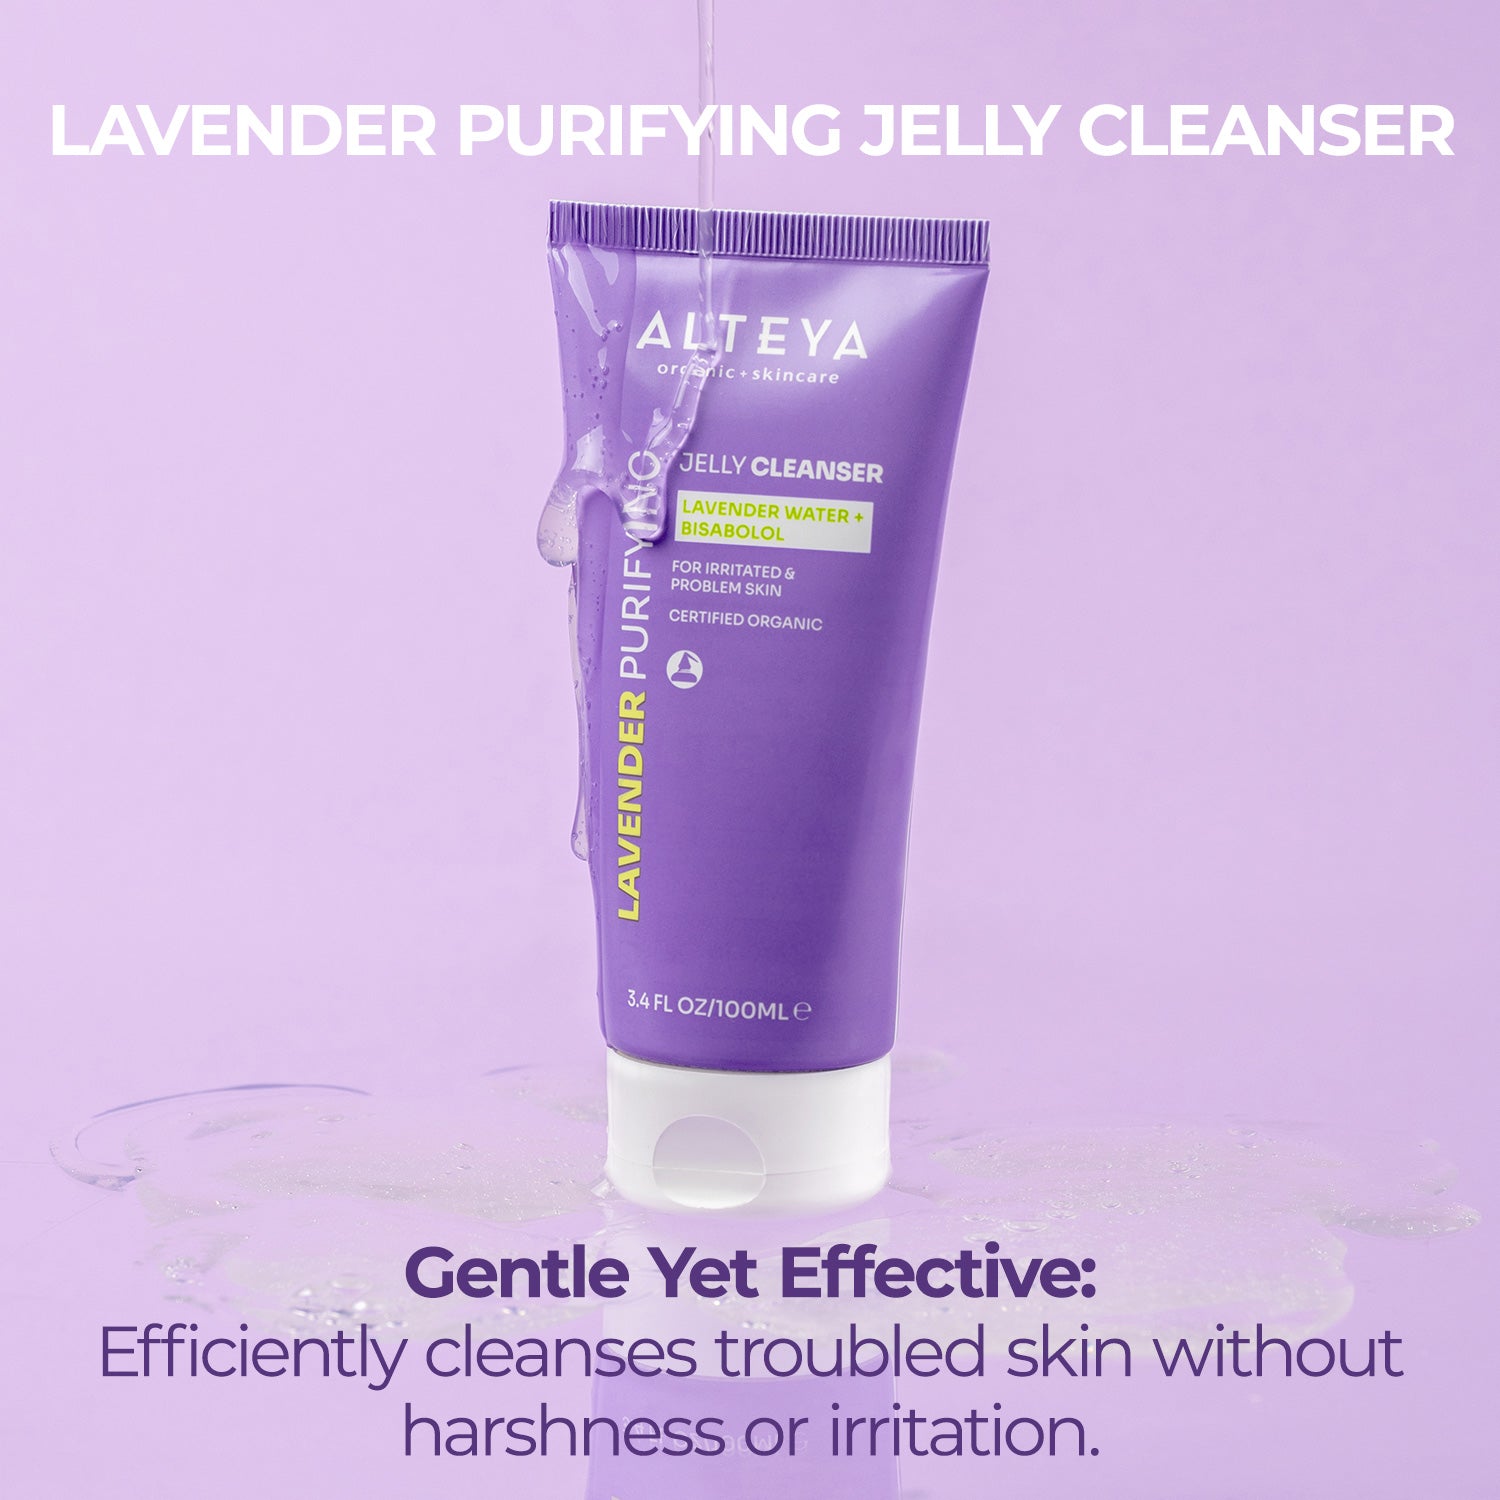 Lavender Purifying Jelly Cleanser